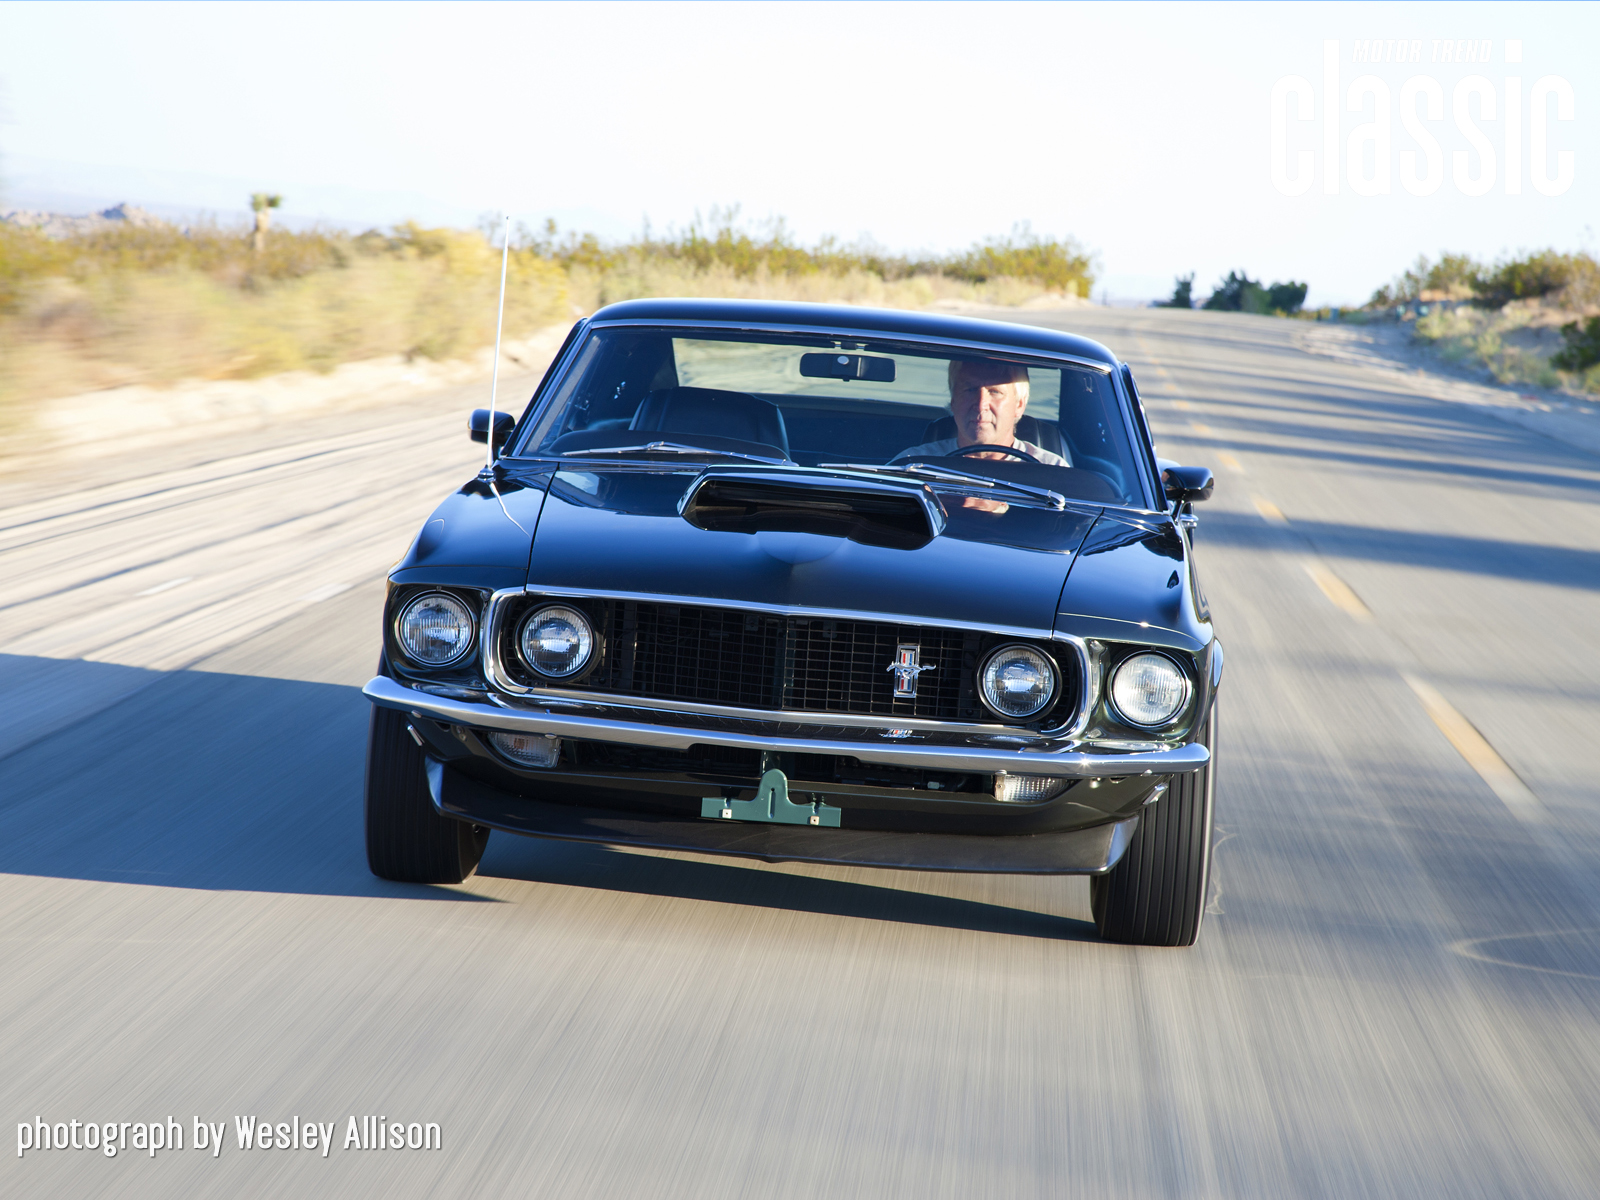 Ford Mustang Boss Front Grill In Motion